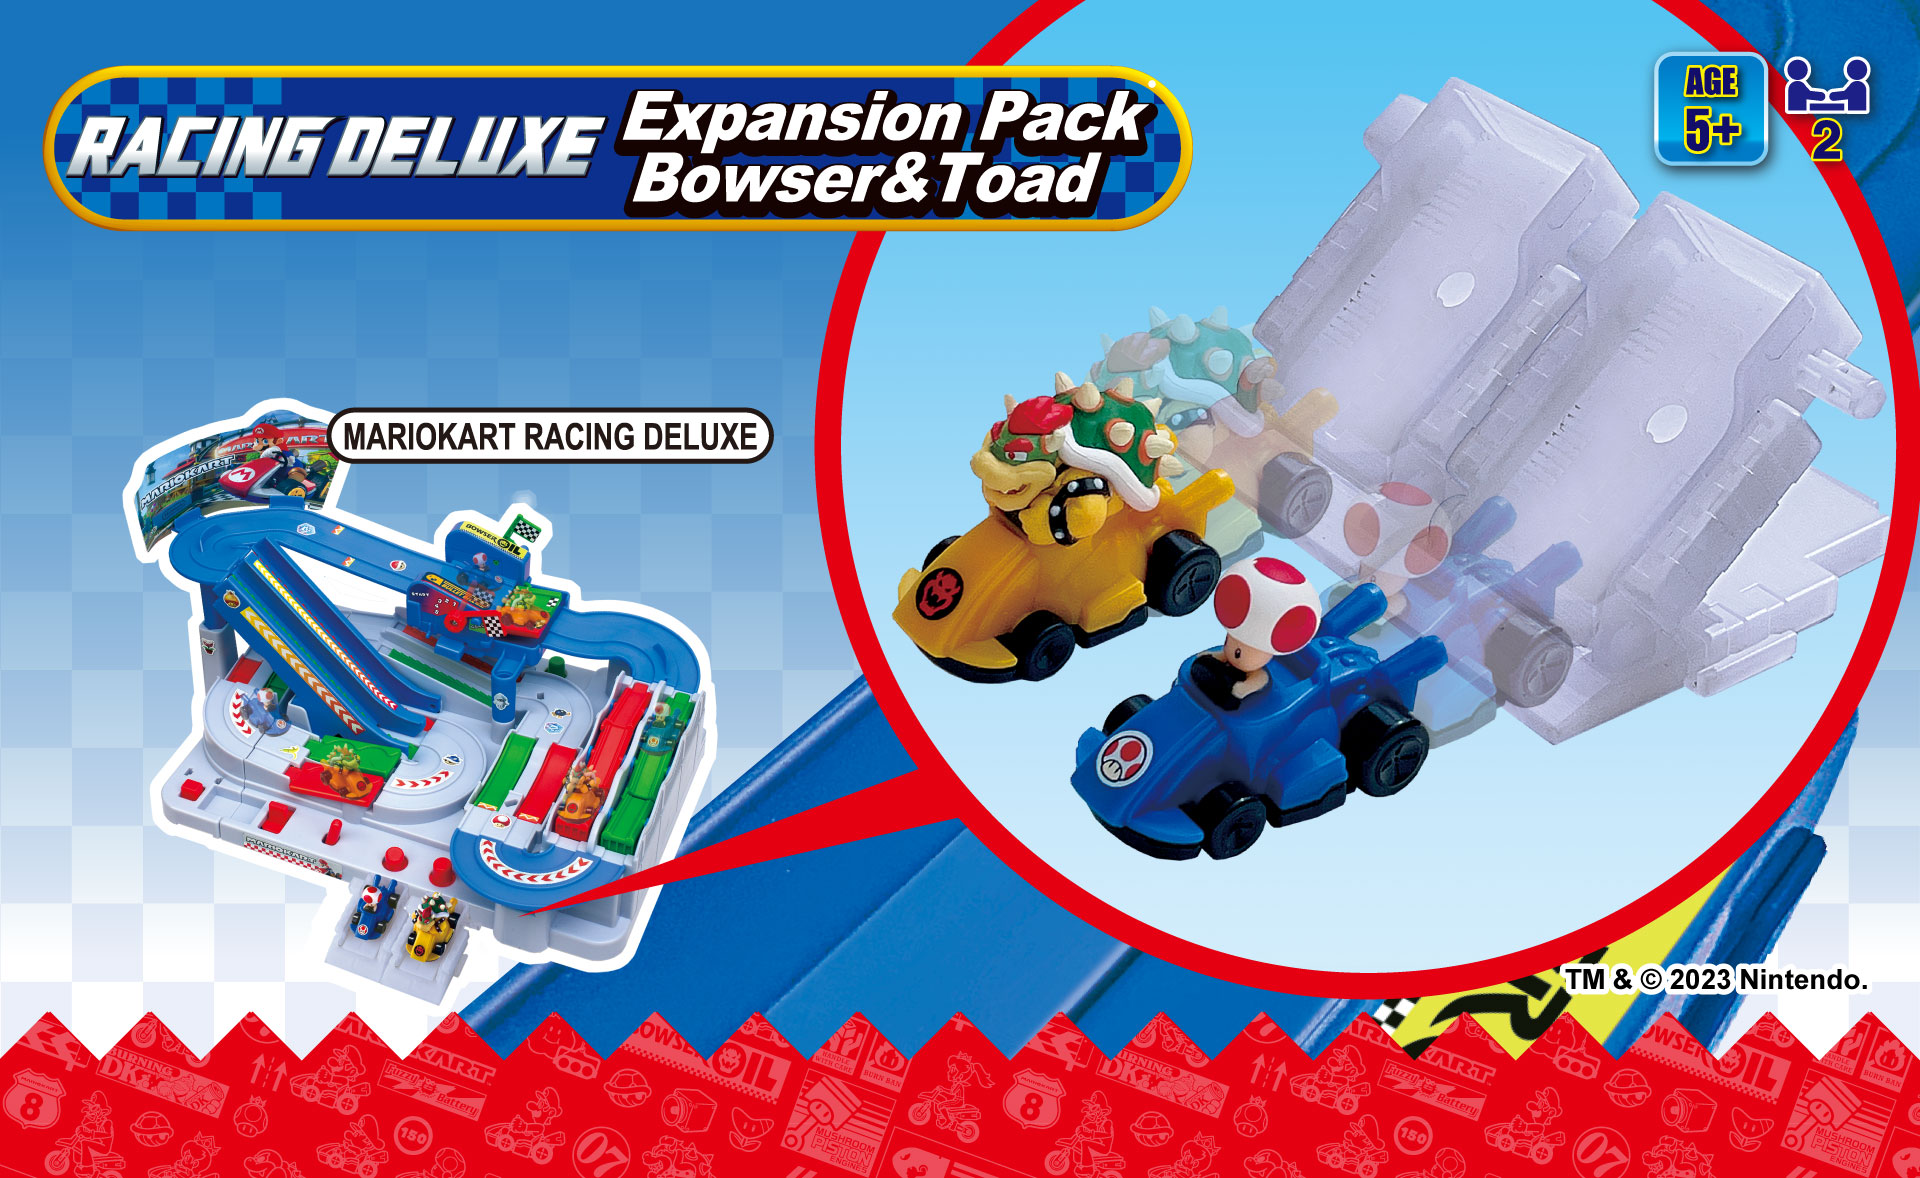 SUPER MARIO KART RACING DELUXE – Expansion Pack Bowser & Toad